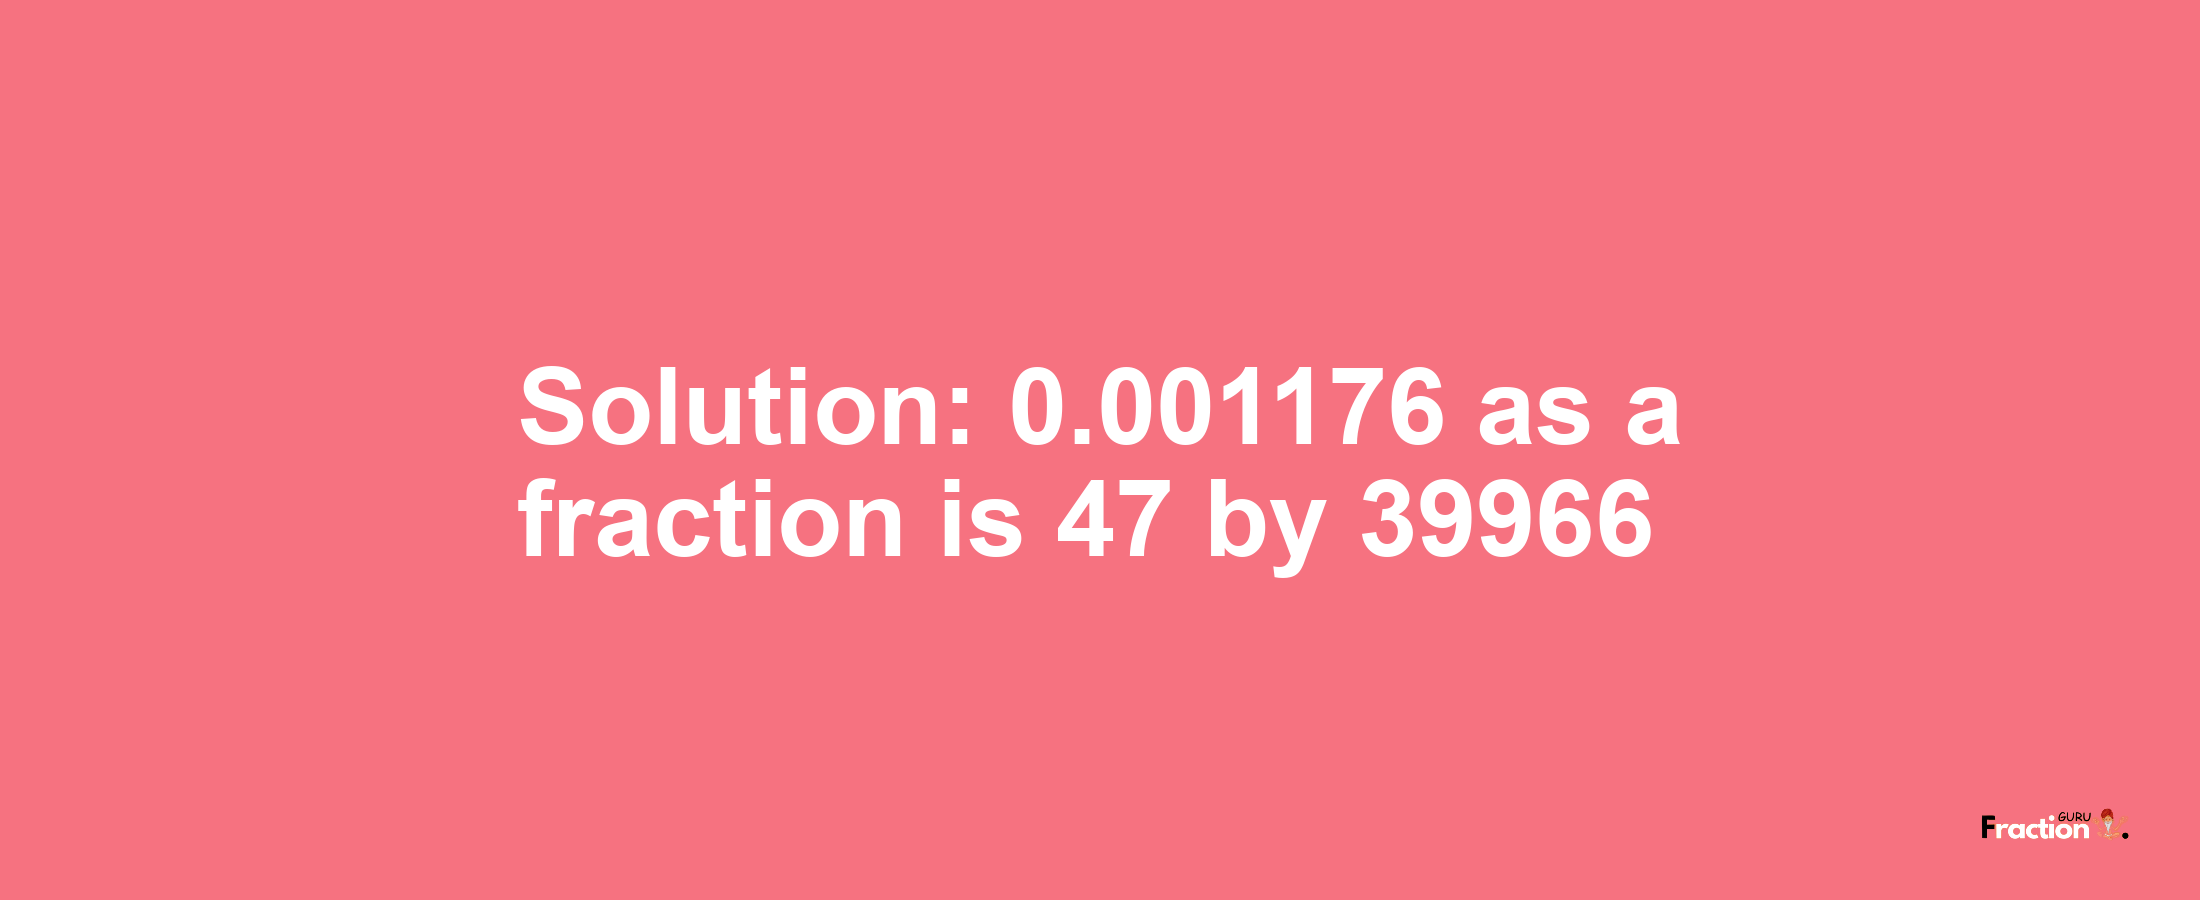 Solution:0.001176 as a fraction is 47/39966